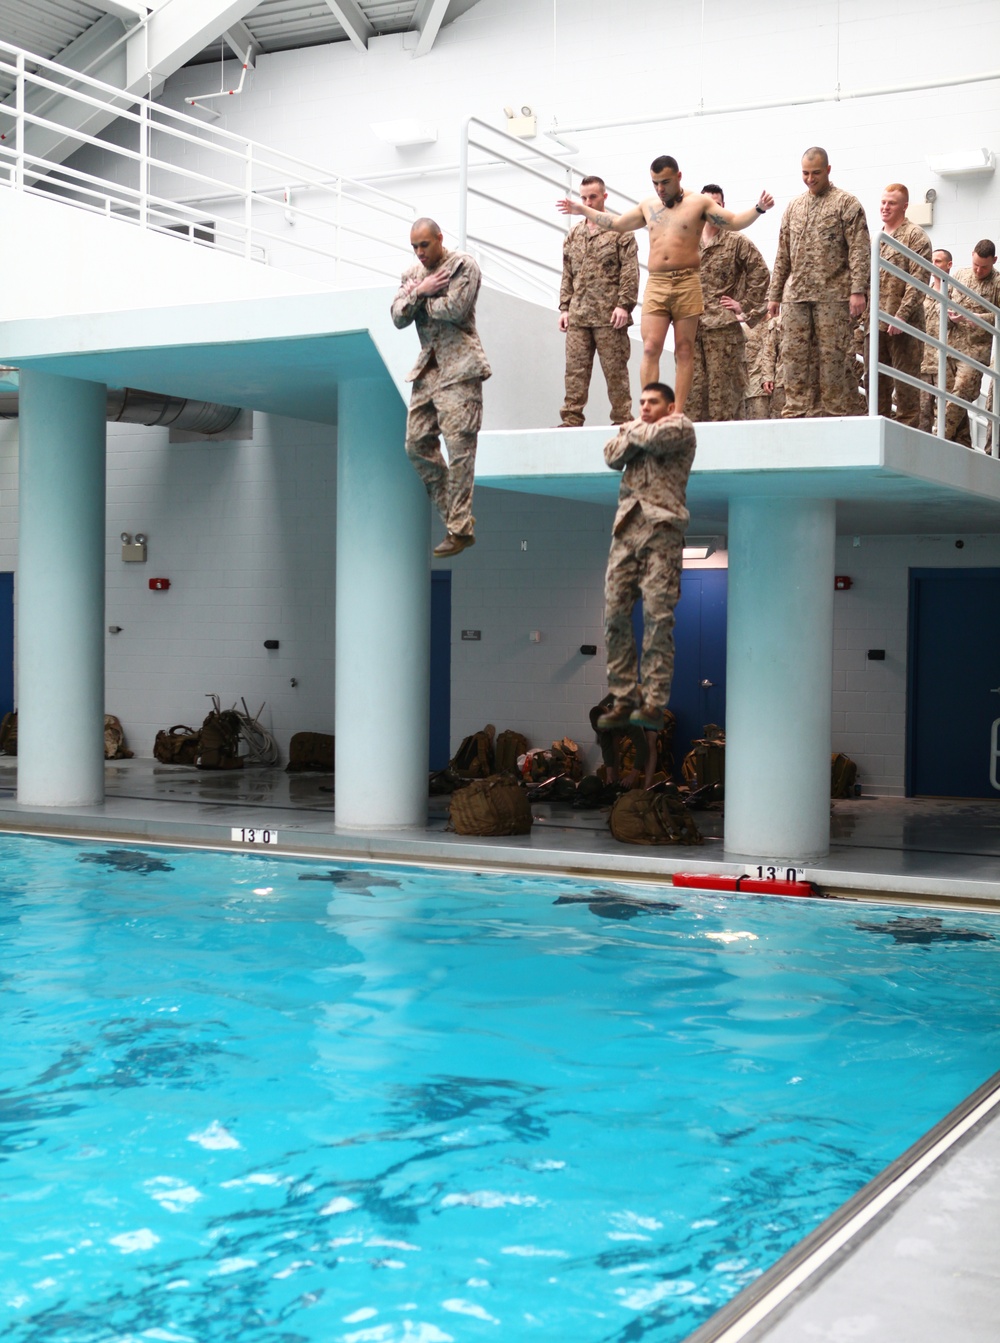 Latest SP-MAGTF Africa unit begins work-ups in the pool